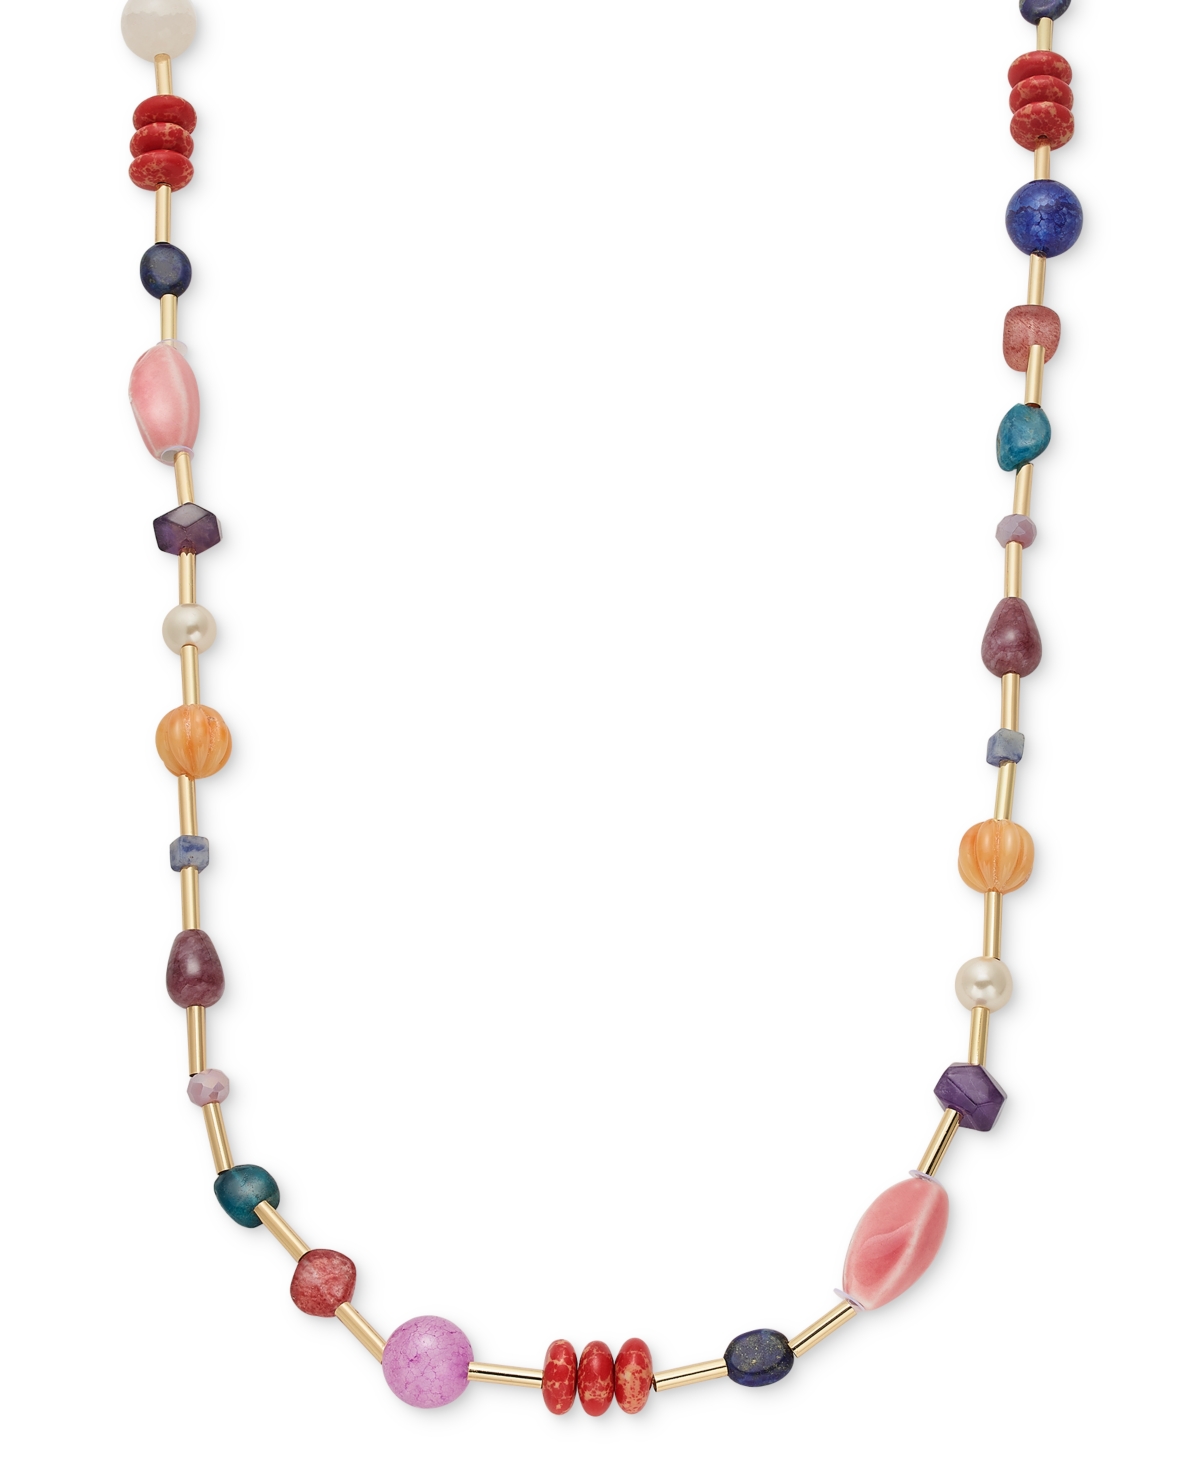 Gold-Tone Multi Bead Station Long Necklace, 42" + 3" extender, Created for Macy's - Brown